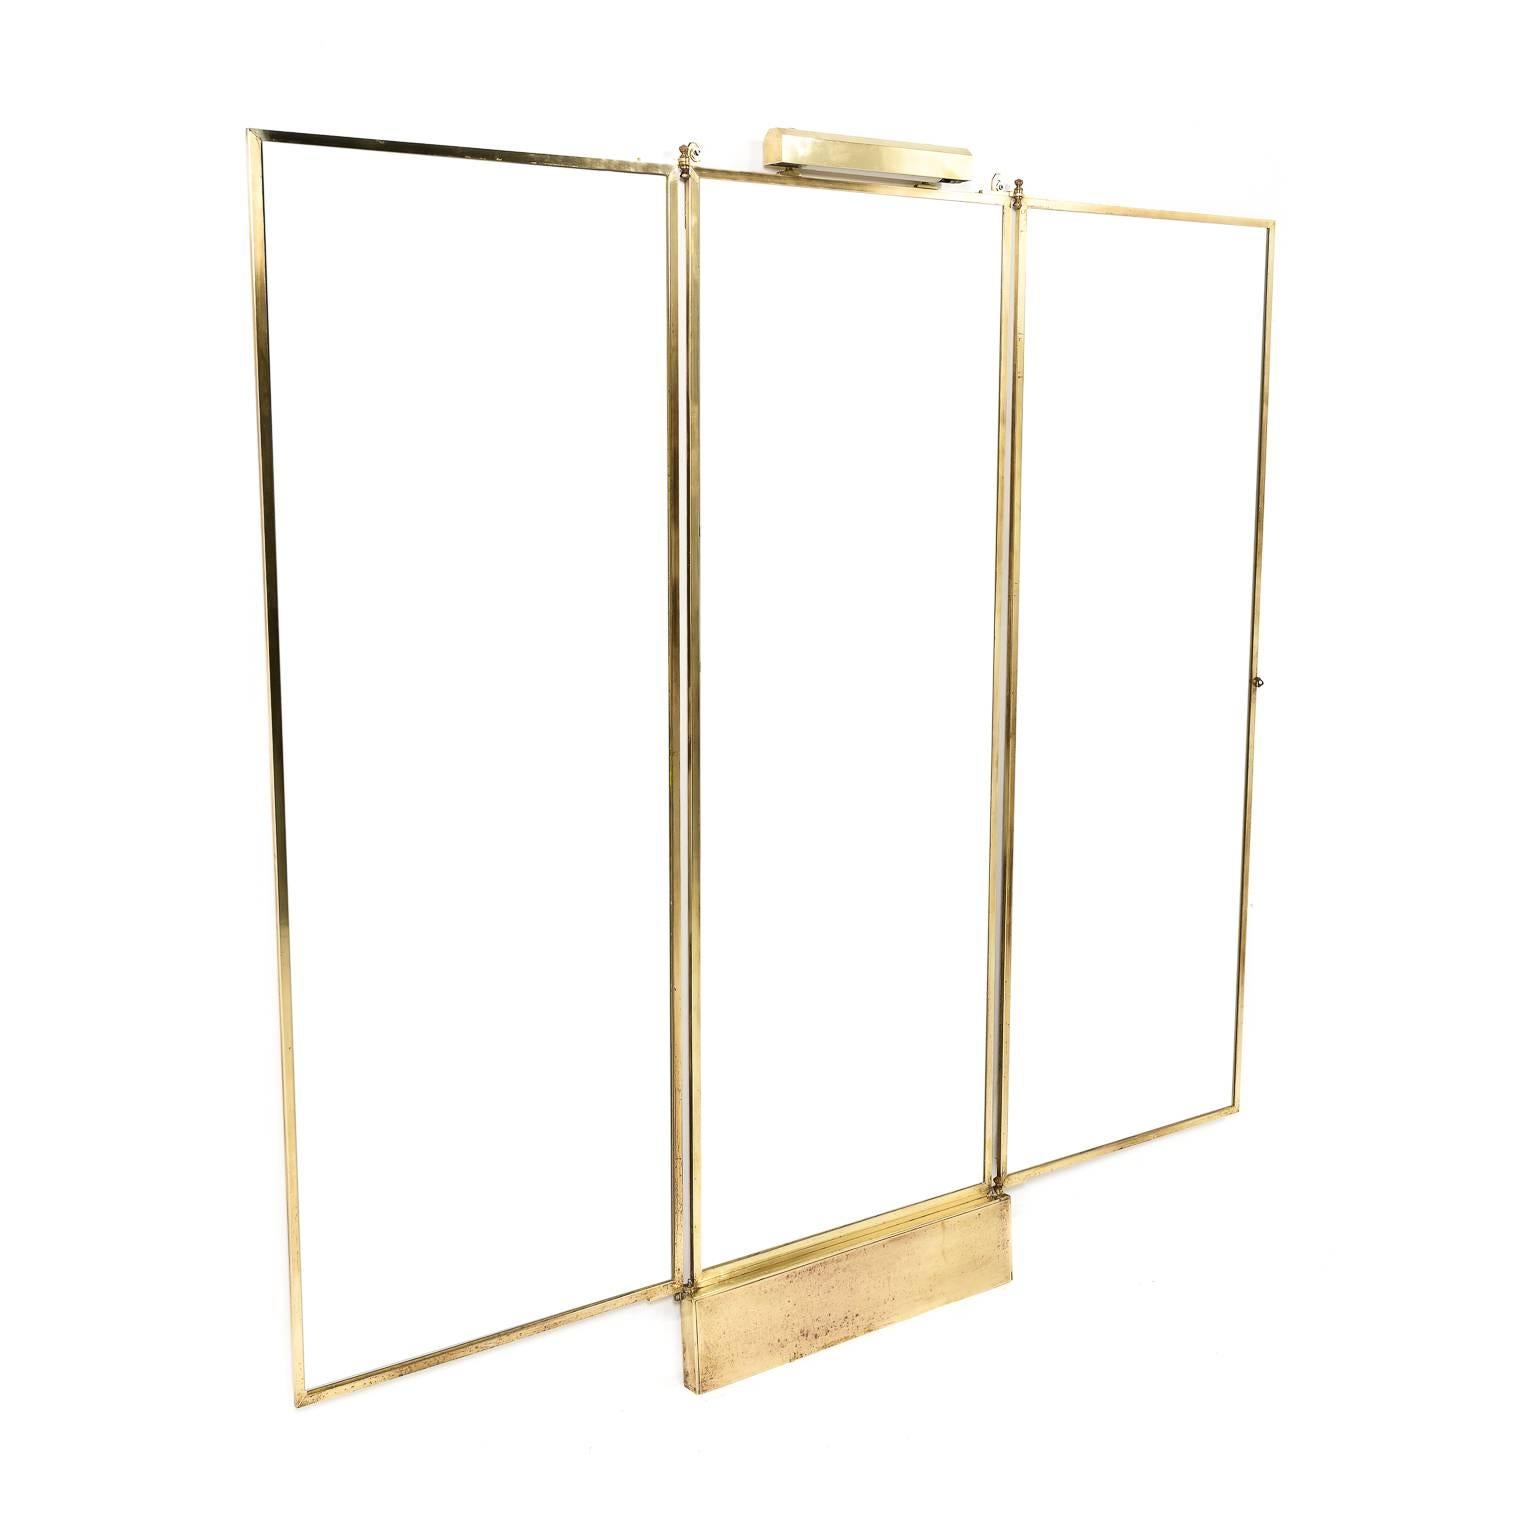 This is a rare large-scale solid brass mirror Brot from the prestigious French company in Paris. The glass is in like-new condition as it was specially treated to resist time, fading, and sea air. This is illuminated from the top to separate it in